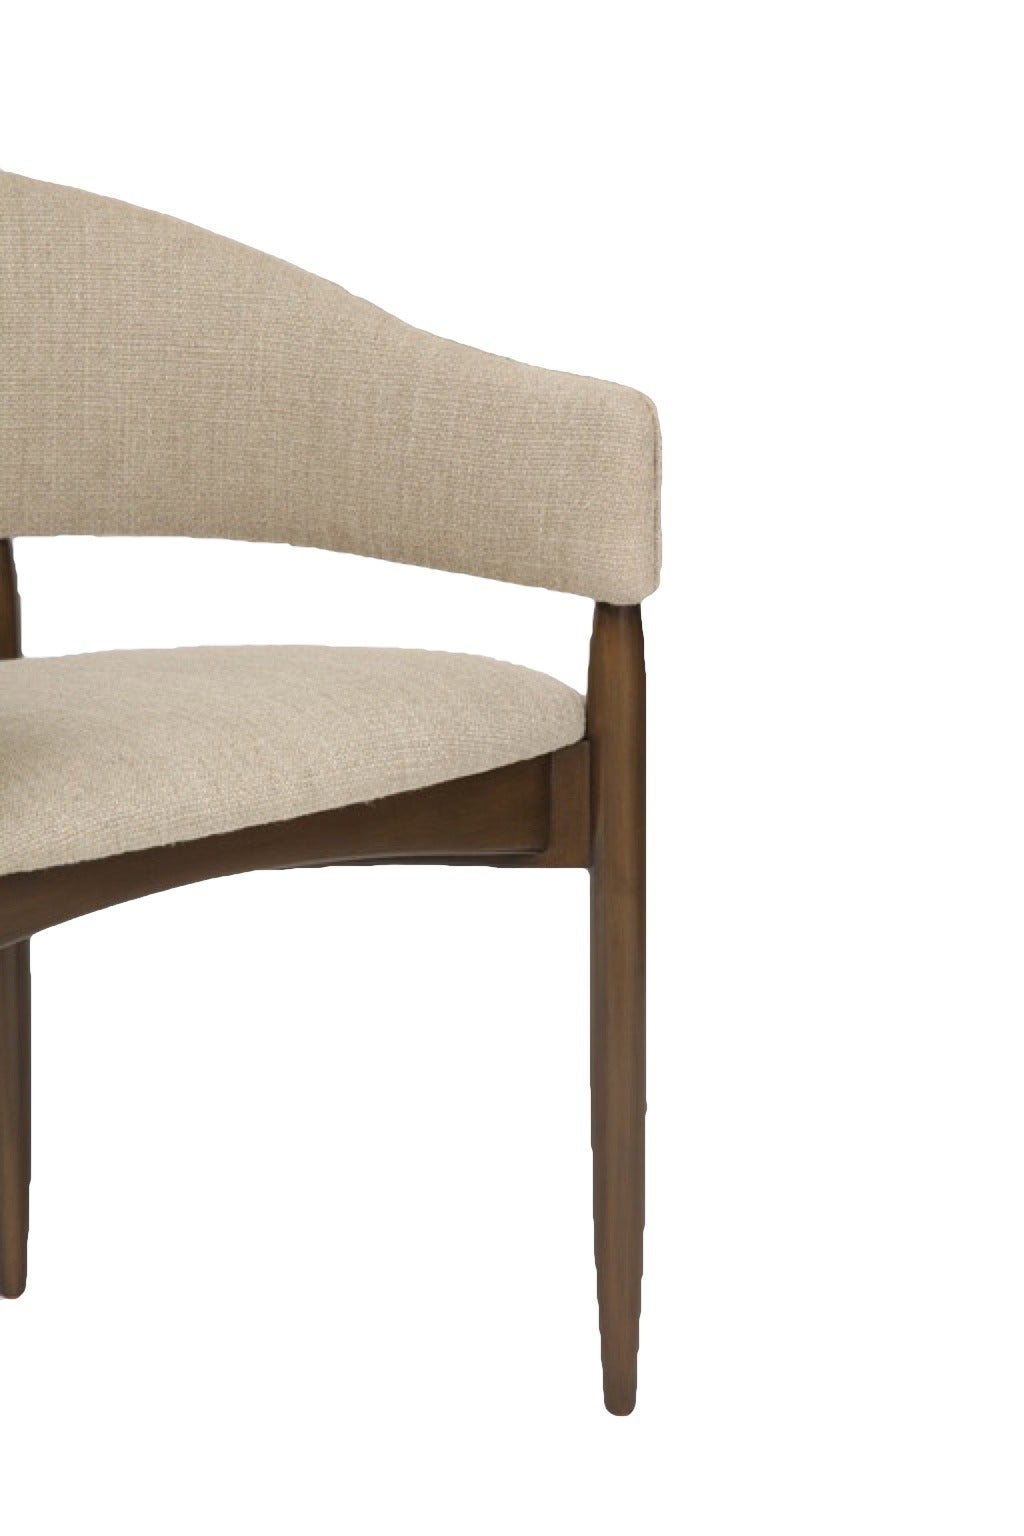 American Enroth Dining Chair For Sale